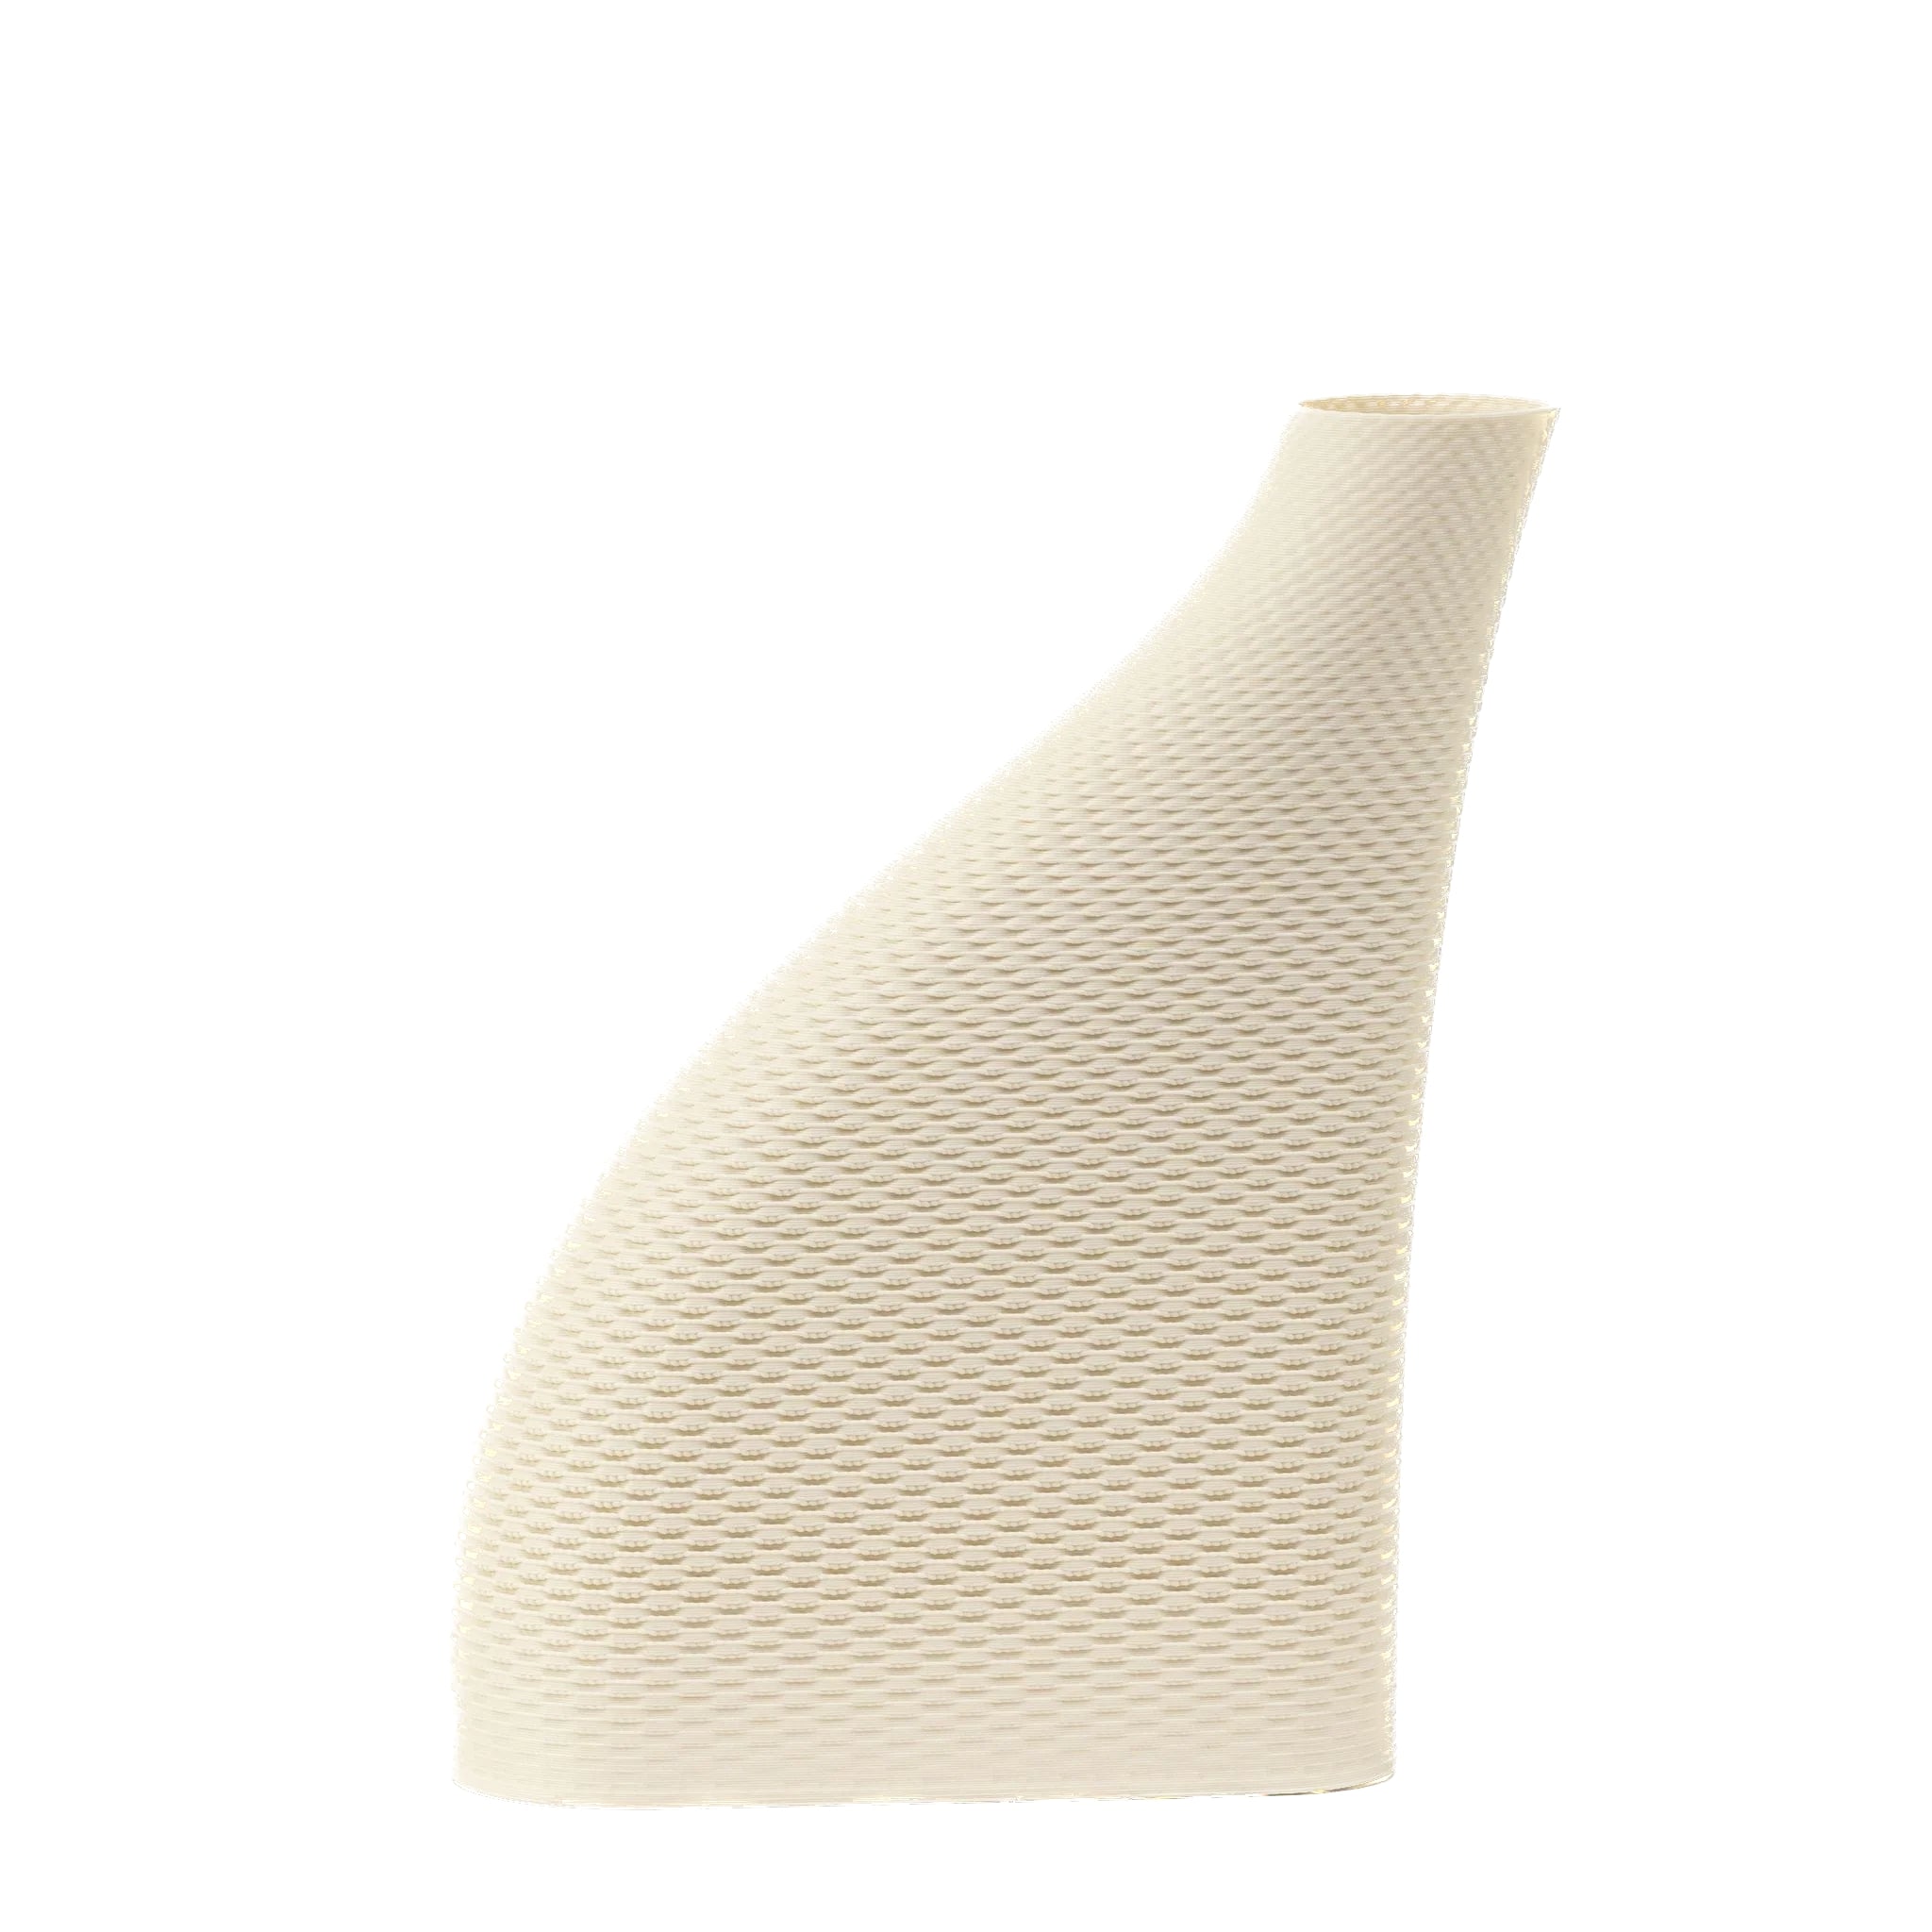 Cyrc wicker vase in eggshell. 3D printed recycled plastic. Product placed in front of a white background